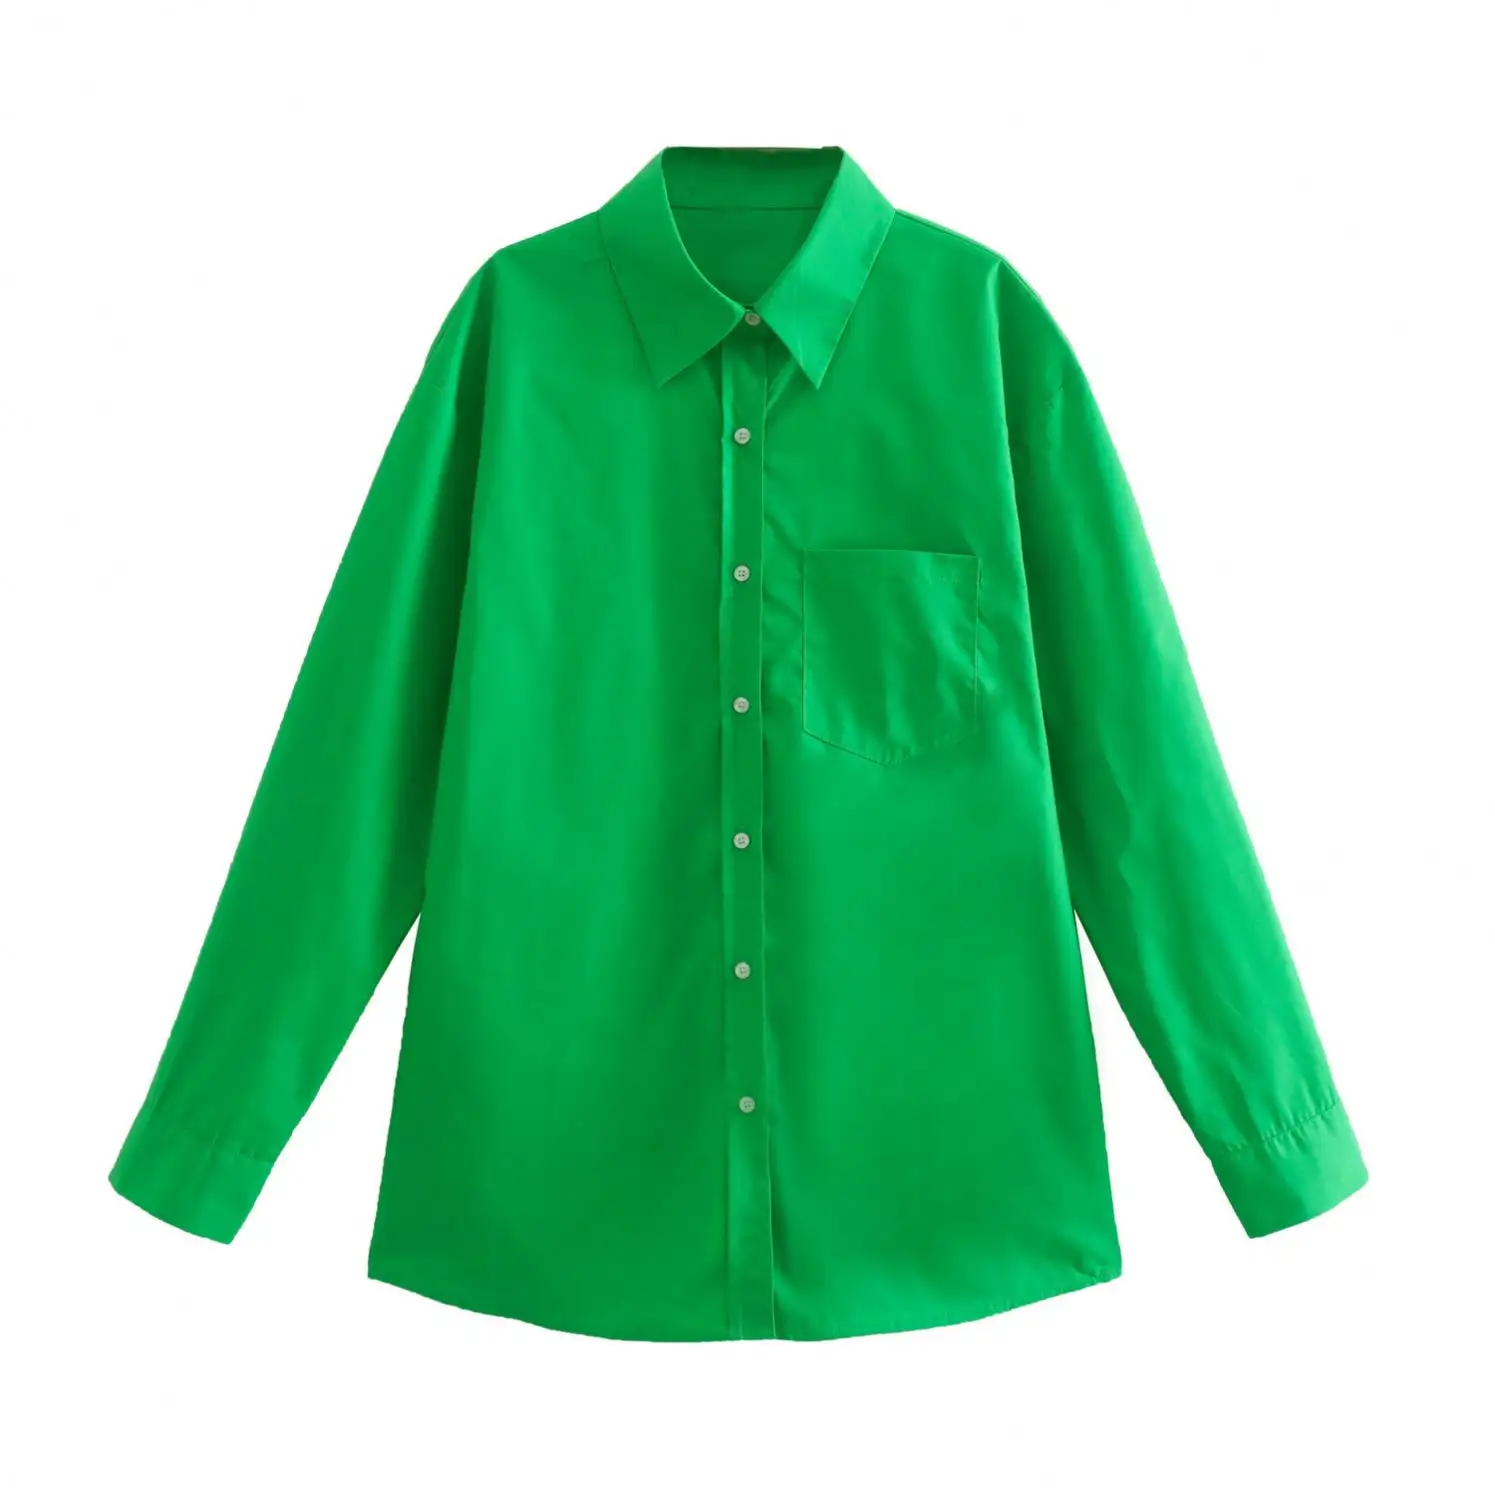 SH505 High quality Basic design turn down collar green color long sleeve women's button up casual blouses shirts with pocket